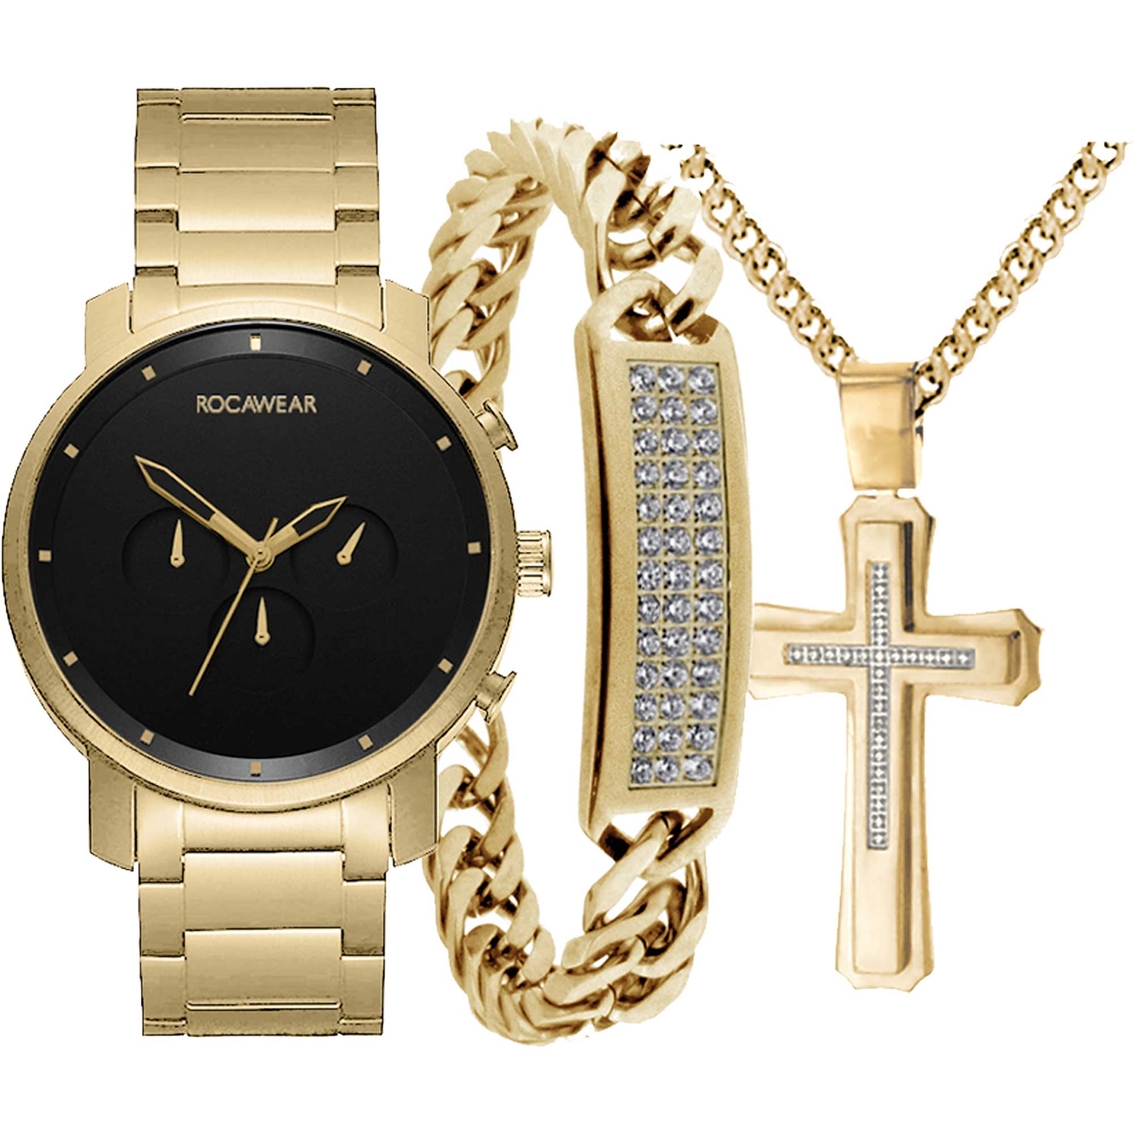 American Exchange Men's Rocawear Watch, Bracelet And Necklace Set  9630g-42-g27, Stainless Steel Band, Jewelry & Watches